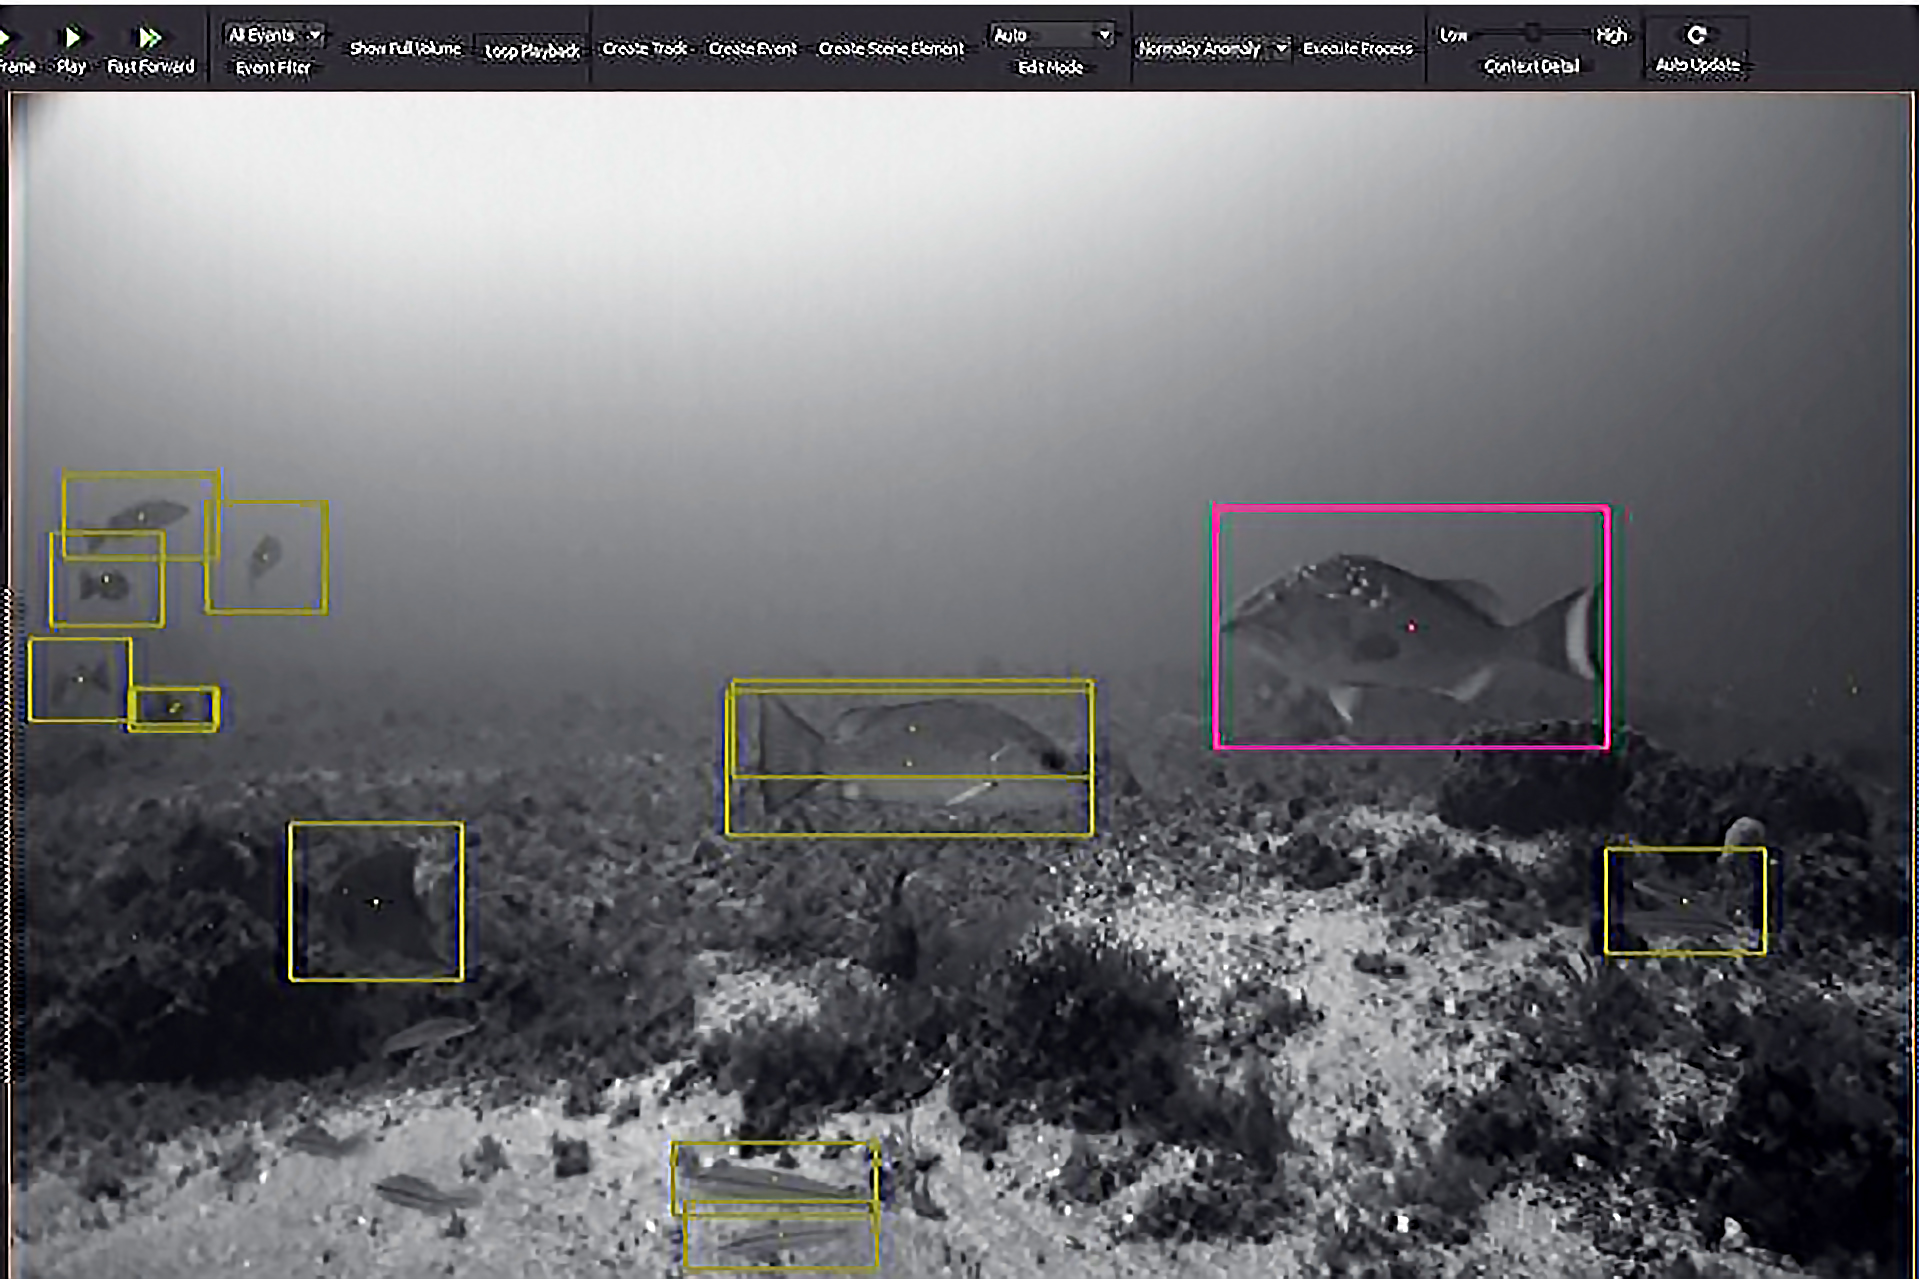 Example of analysis using VIAME and its deep learning algorithms to detect and identify multiple species of fish in one image. 